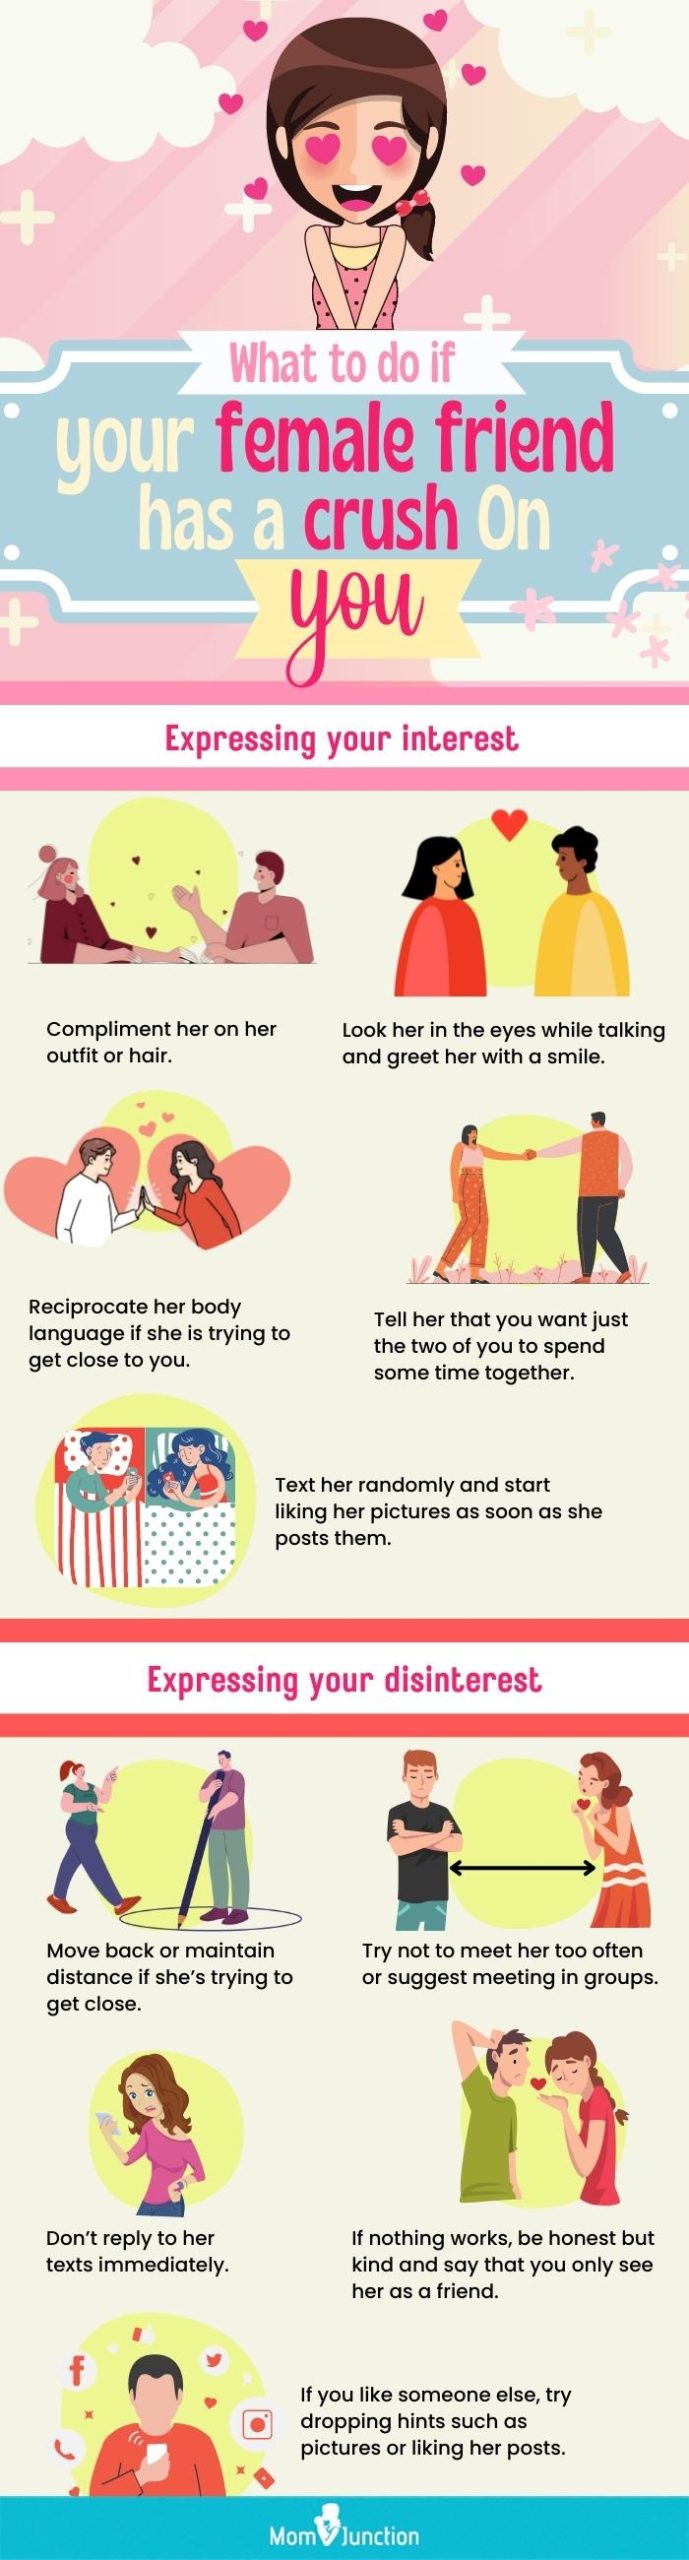 how to behave around a girl who secretly likes you (infographic)